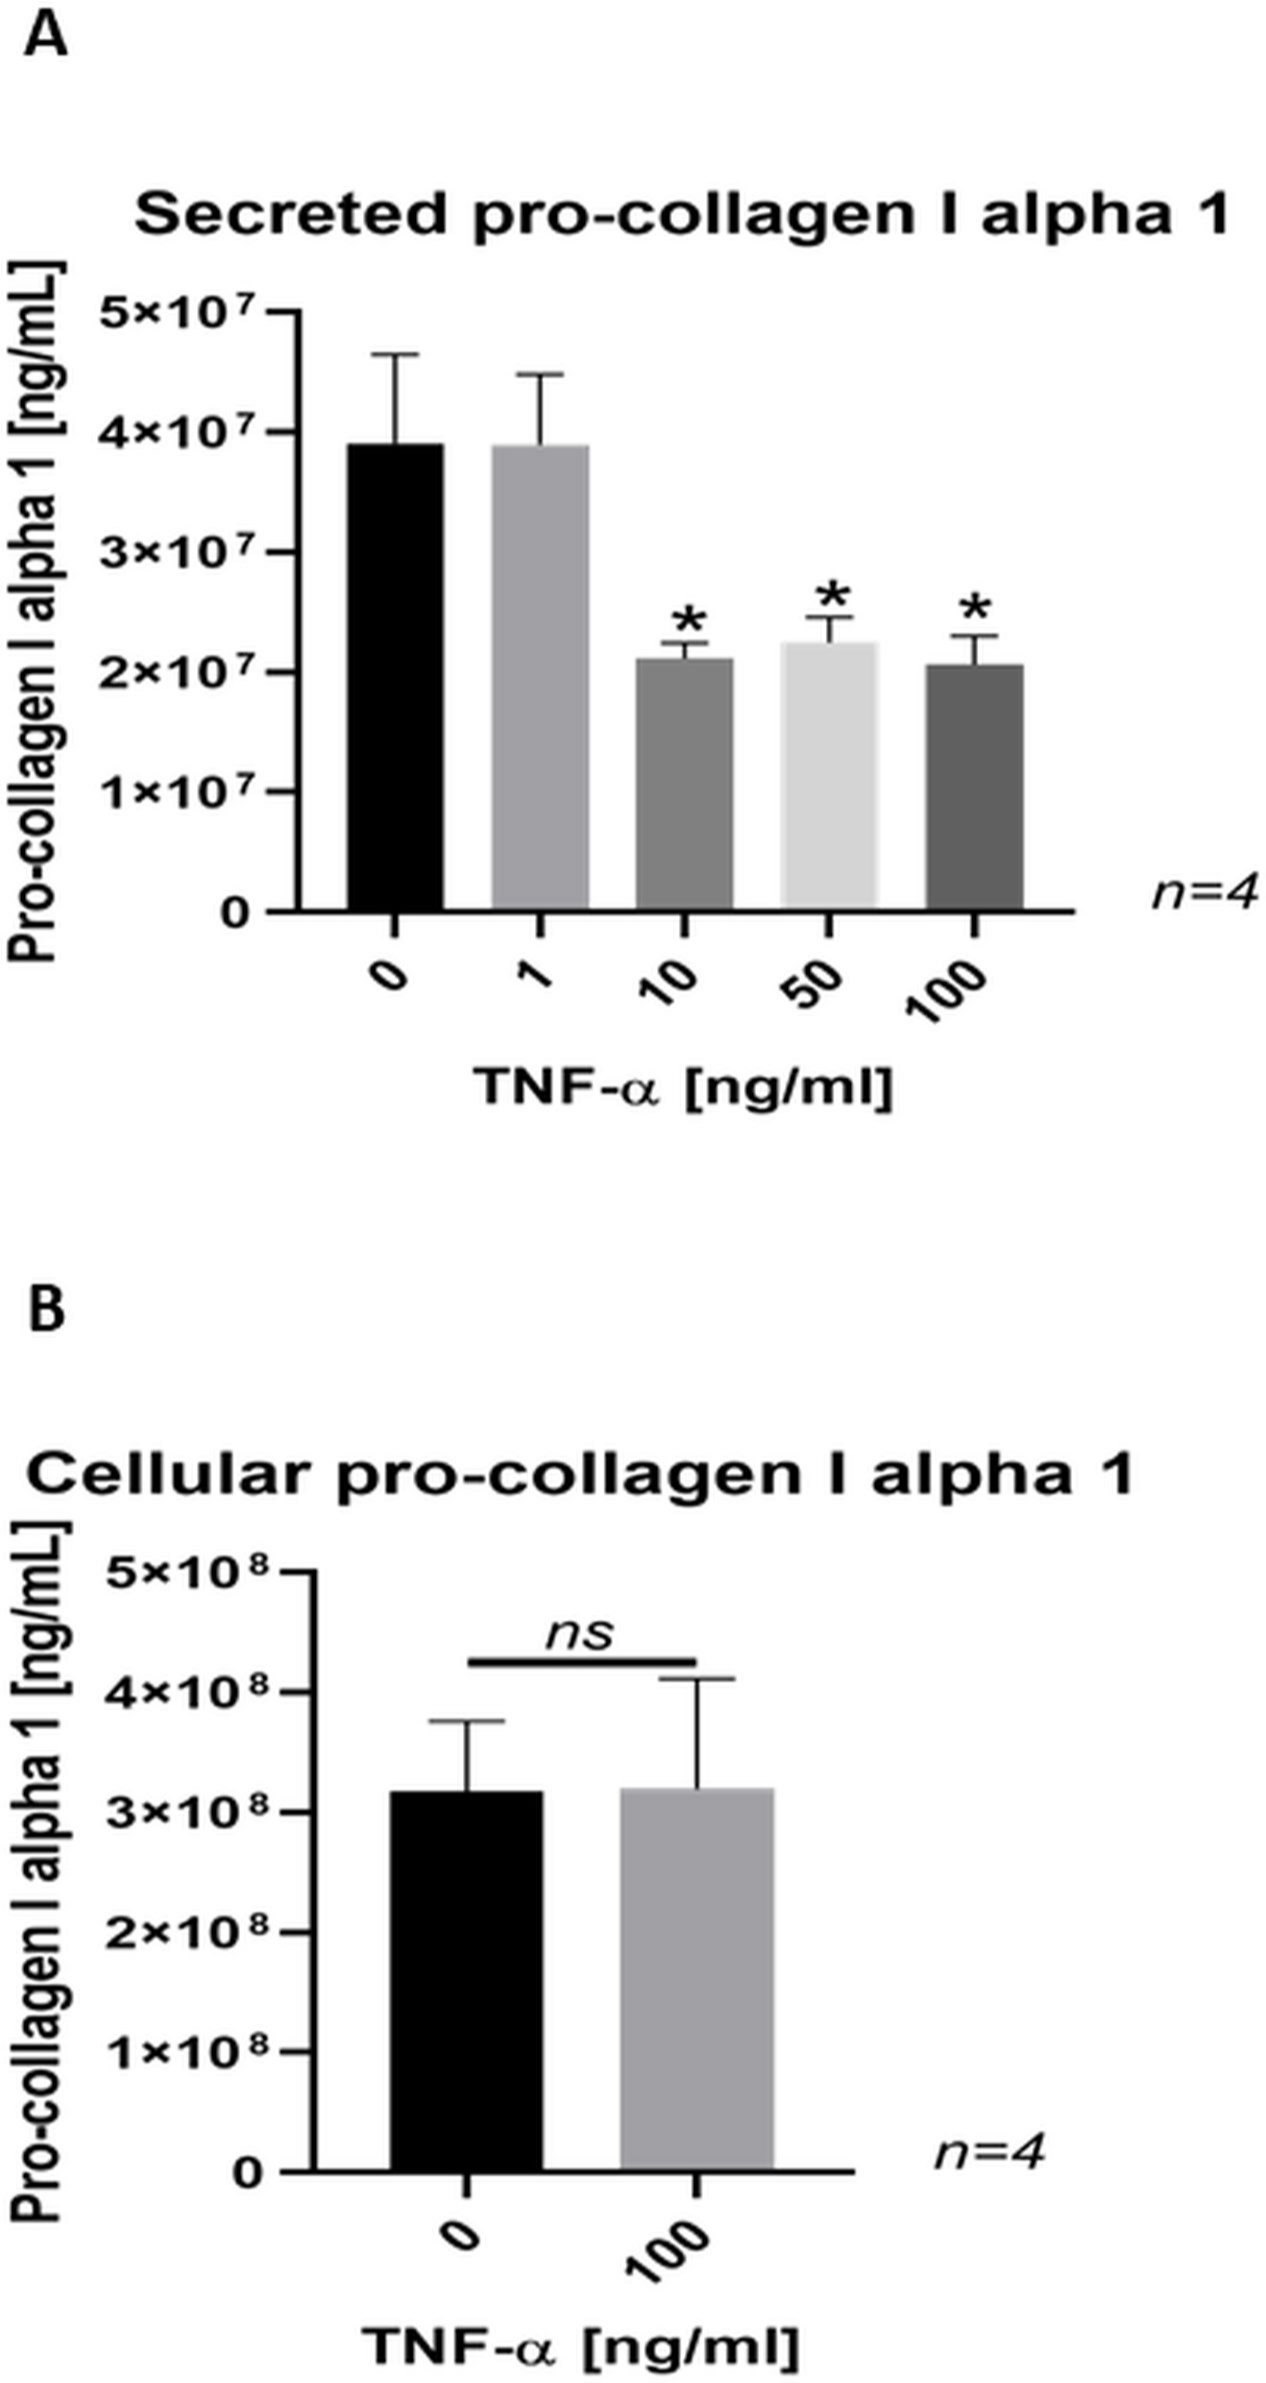 Fig. 7 
            a) Bar chart showing a dose-dependent decrease in the secretion of pro-collagen I α 1 in SaOs-2 cells treated with tumour necrosis factor-alpha (TNF-α) for 24 hours. Data are presented as the mean ± SD. *p < 0.001 versus control group, evaluated by one-way analysis of variance followed by post-hoc analysis using Dunnett’s multiple comparisons test. b) Bar chart showing no difference in cellular pro-collagen I alpha 1 content in SaOs-2 cells treated with TNF-α for 24 hours. Data are presented as the mean ± SD. p > 0.05 versus control group. ns, not significant.
          